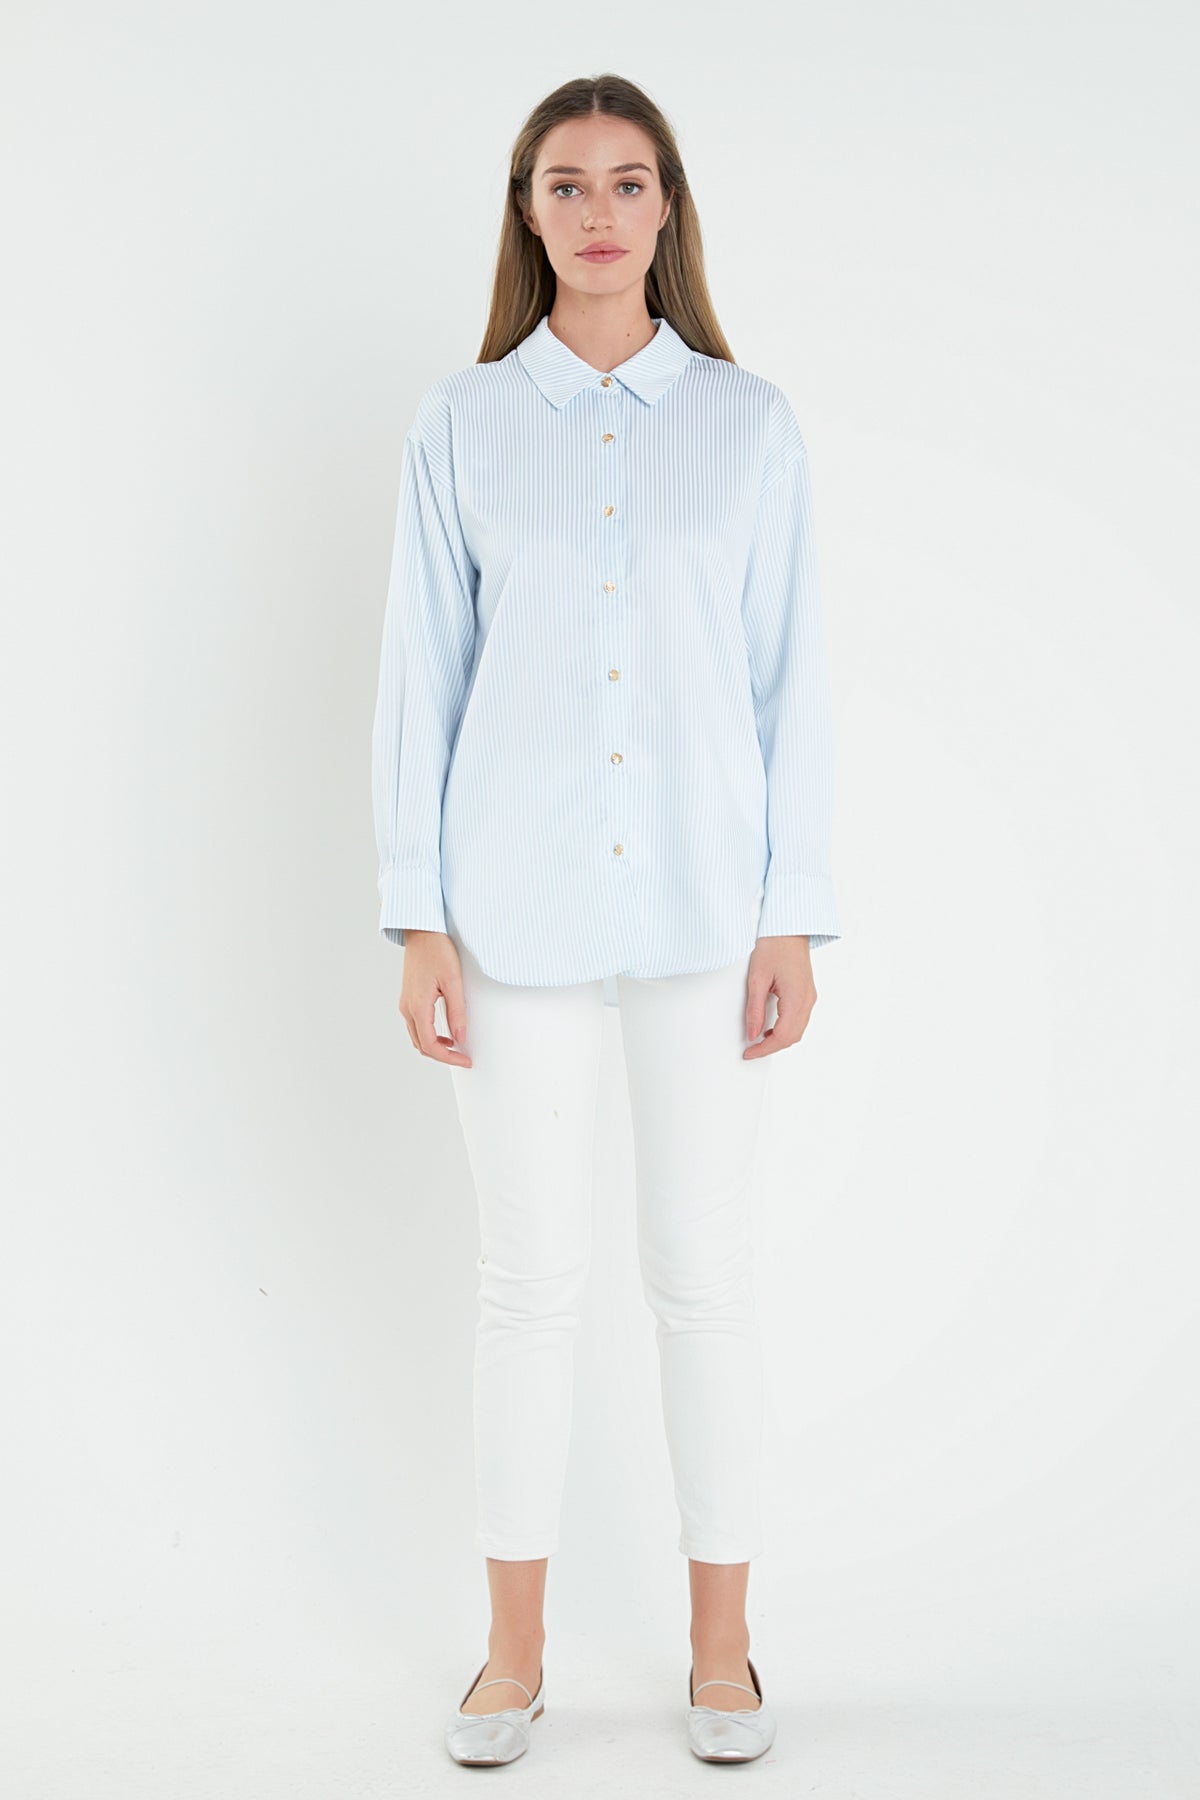 ENGLISH FACTORY - Stripe Shirt - SHIRTS & BLOUSES available at Objectrare